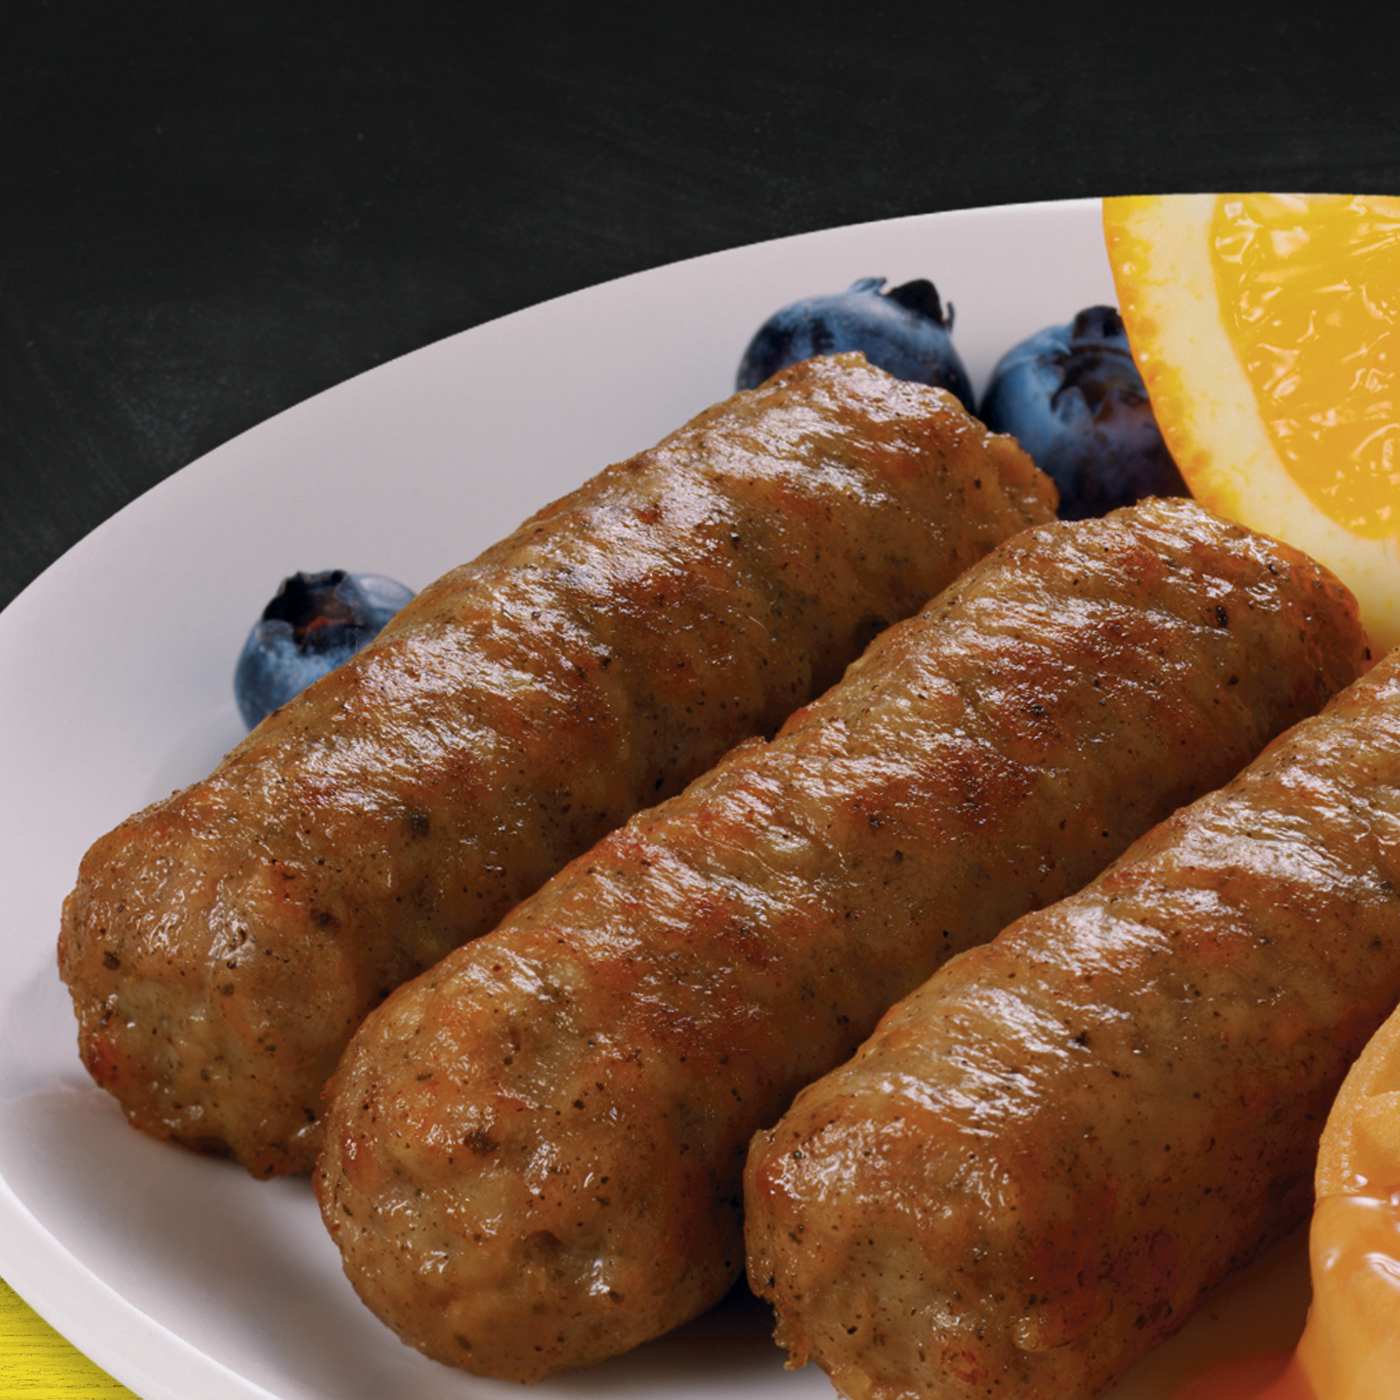 Banquet Brown ‘N Serve Vermont Maple Fully Cooked Sausage Links; image 5 of 7